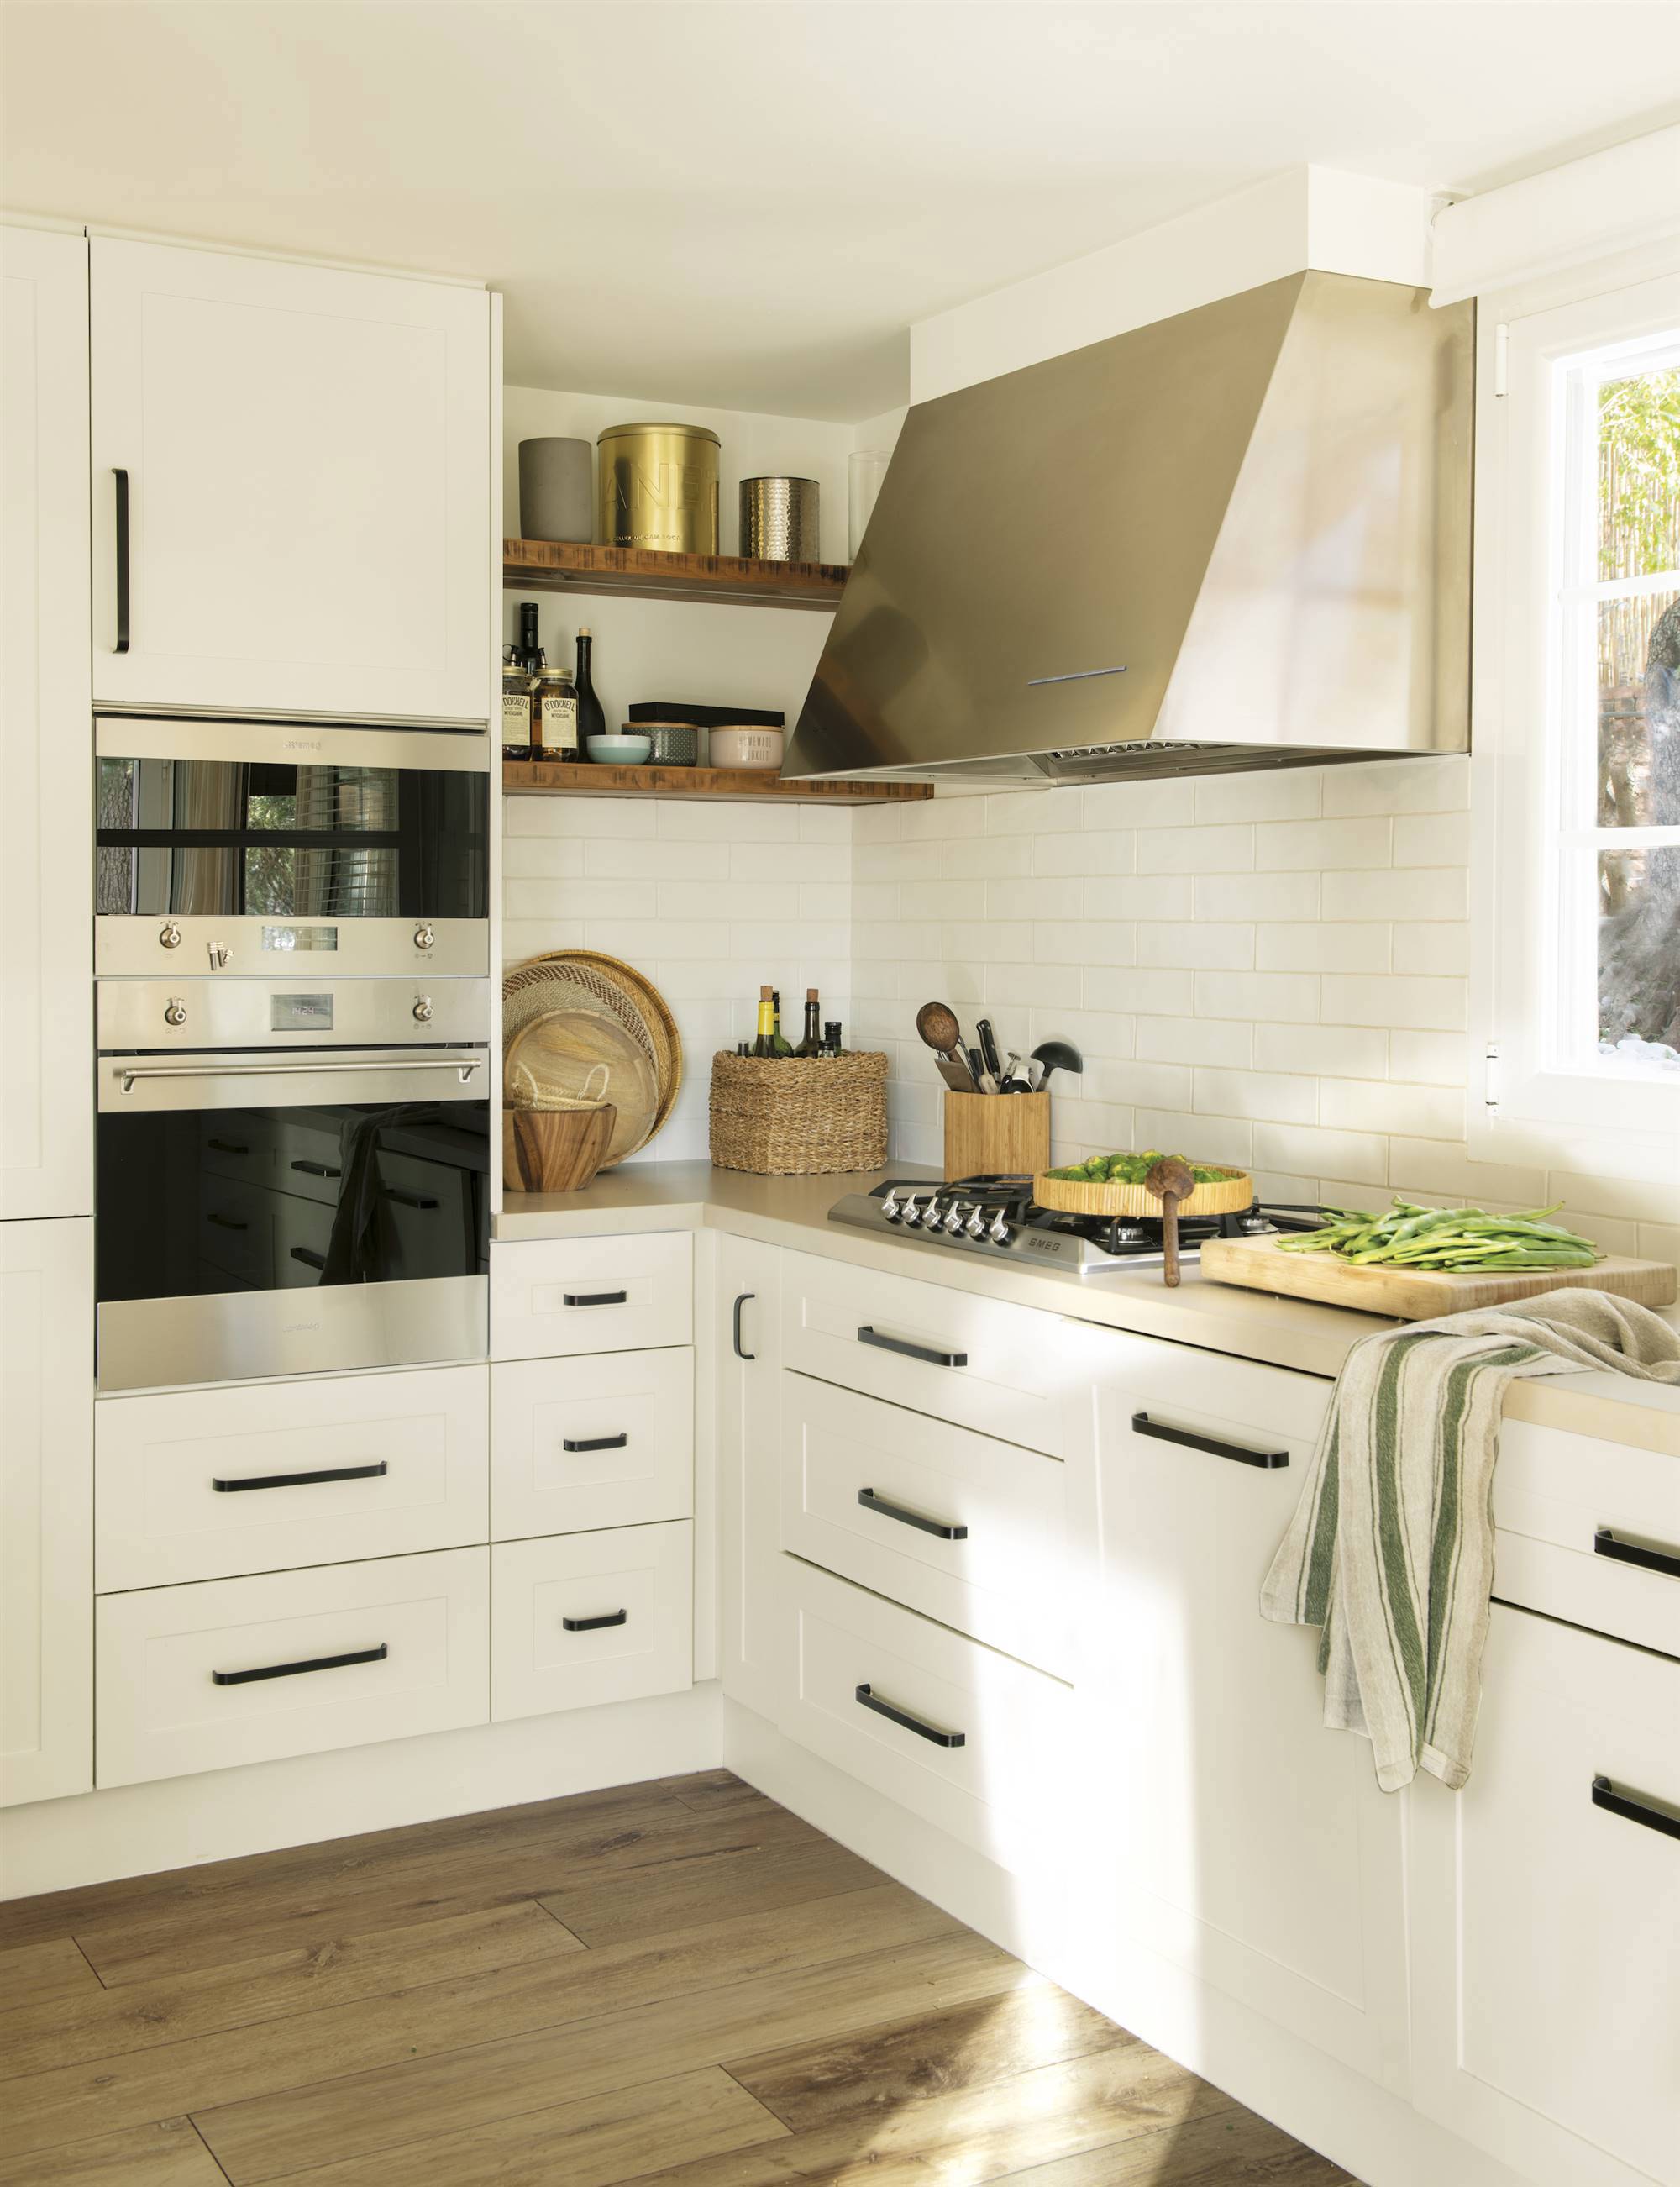 Small white kitchen with black handles and stainless steel hood 00553621